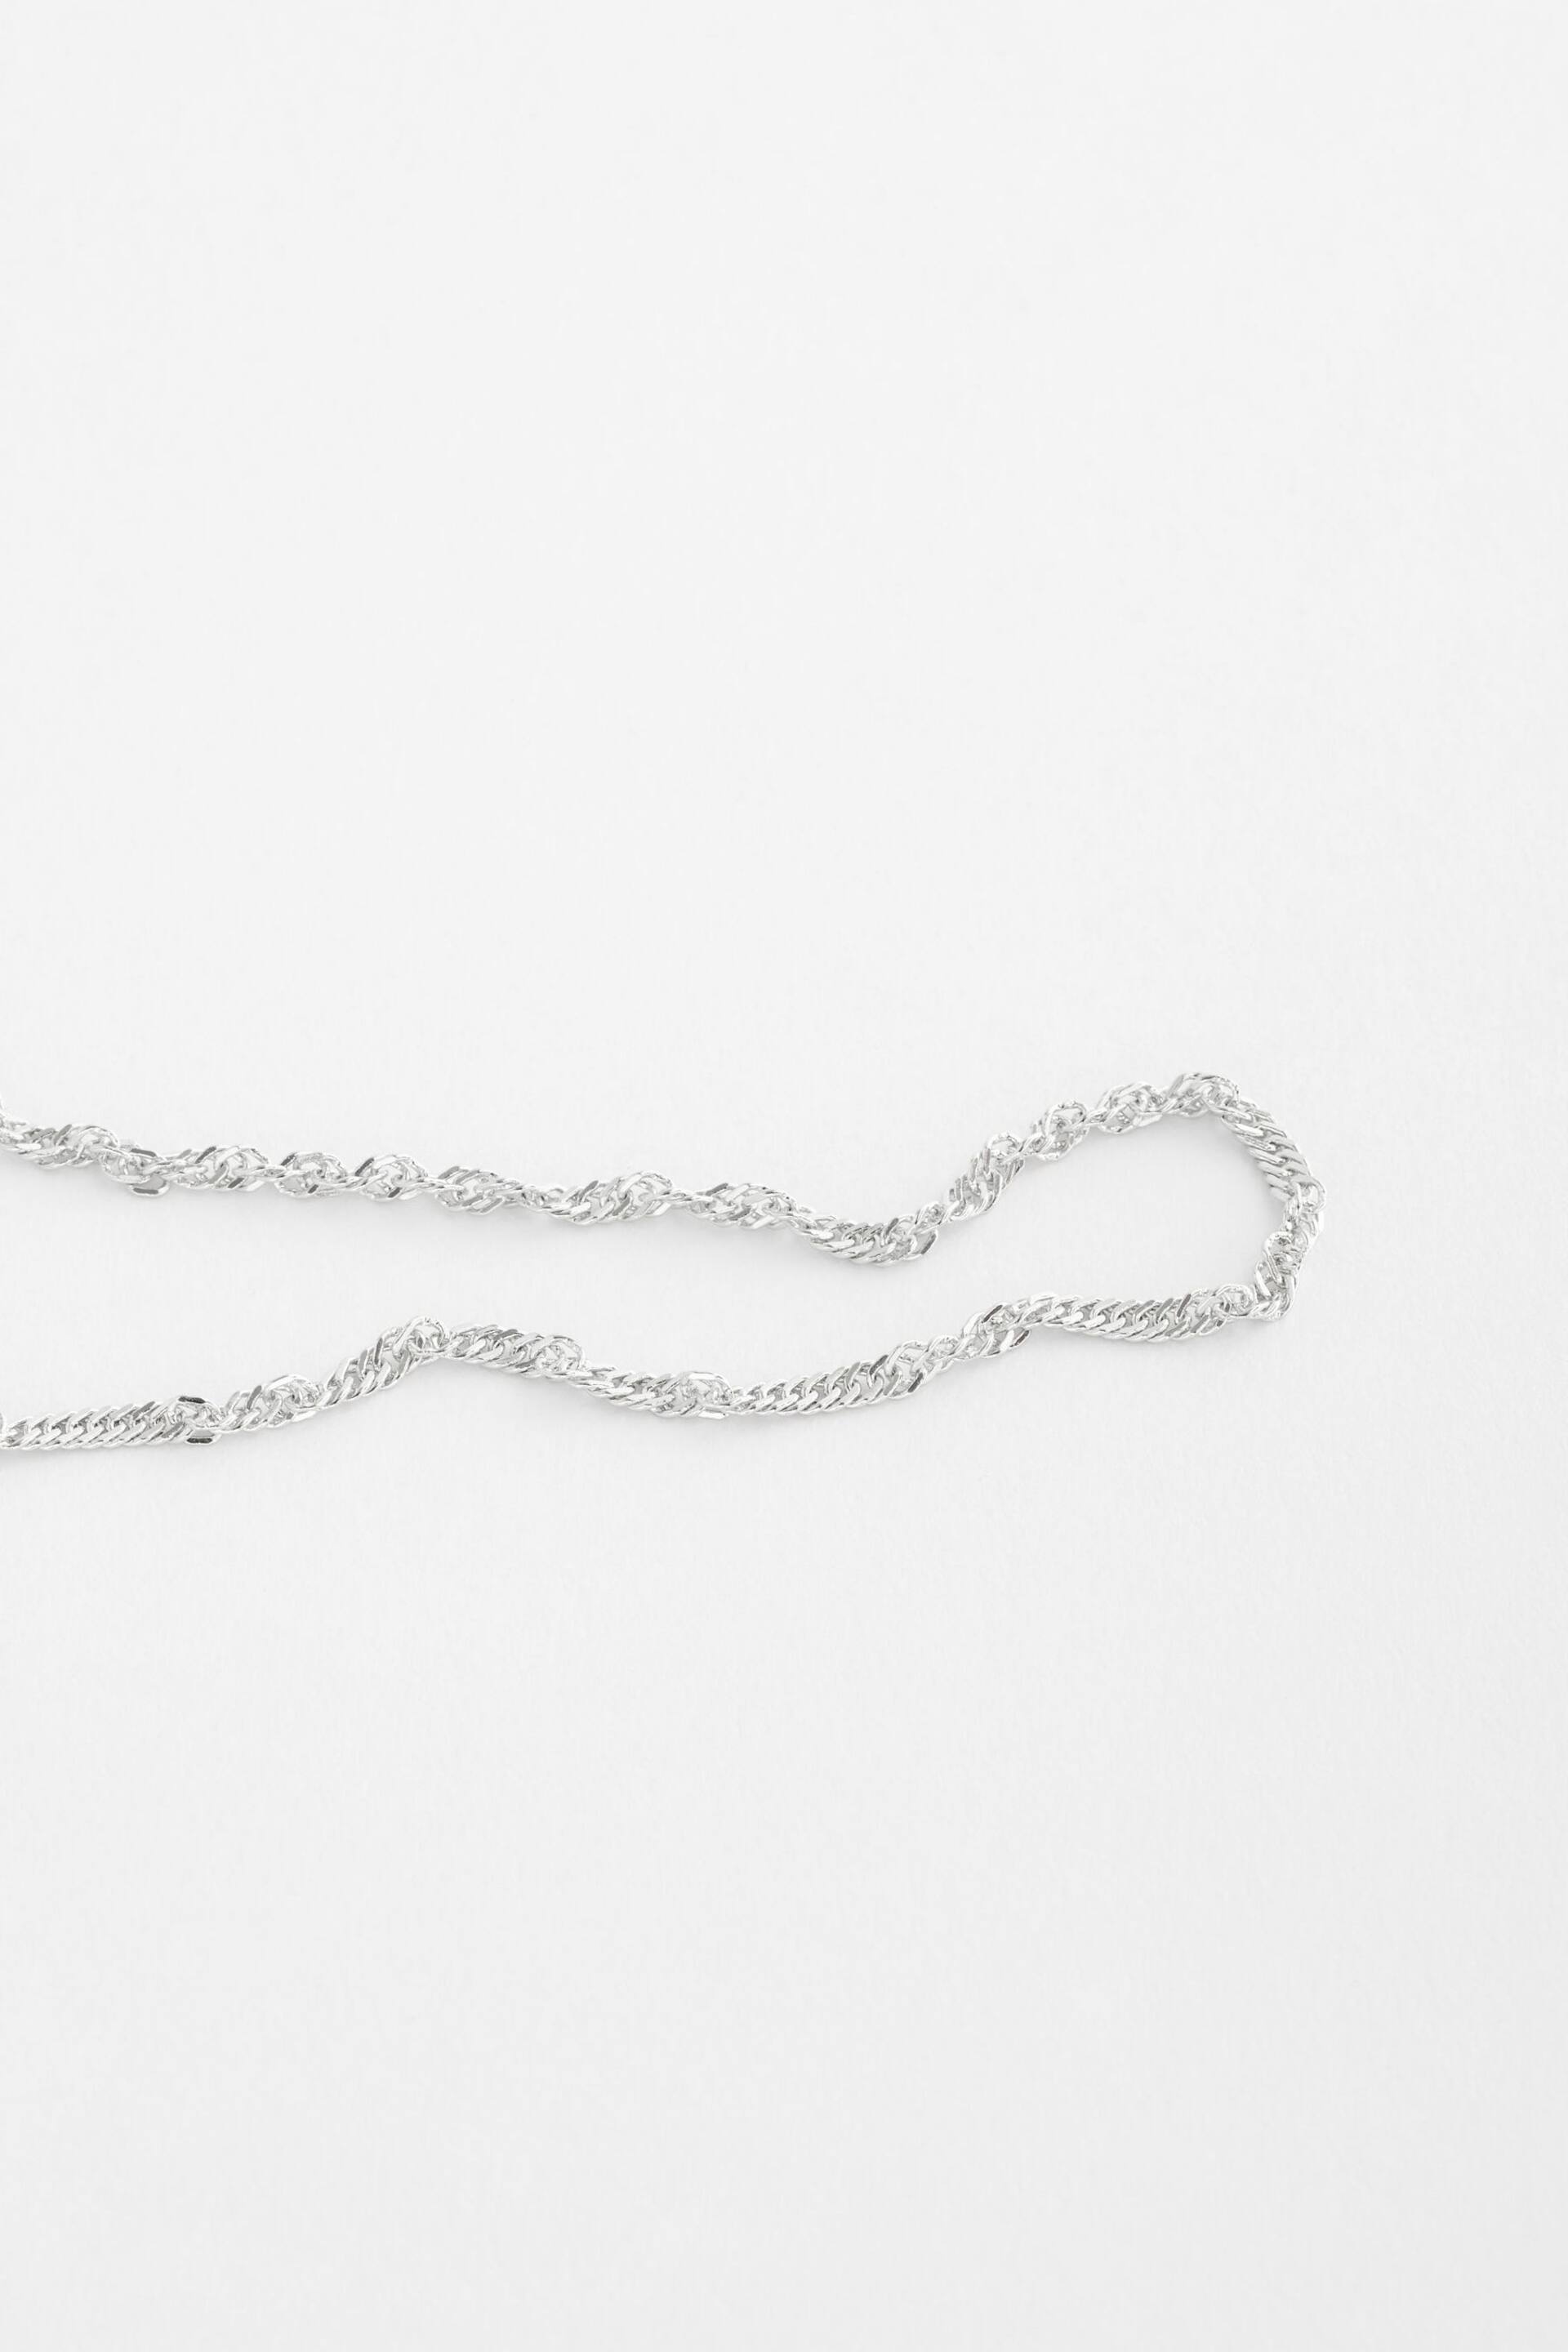 Sterling Silver Twisted Chain Anklet - Image 4 of 10